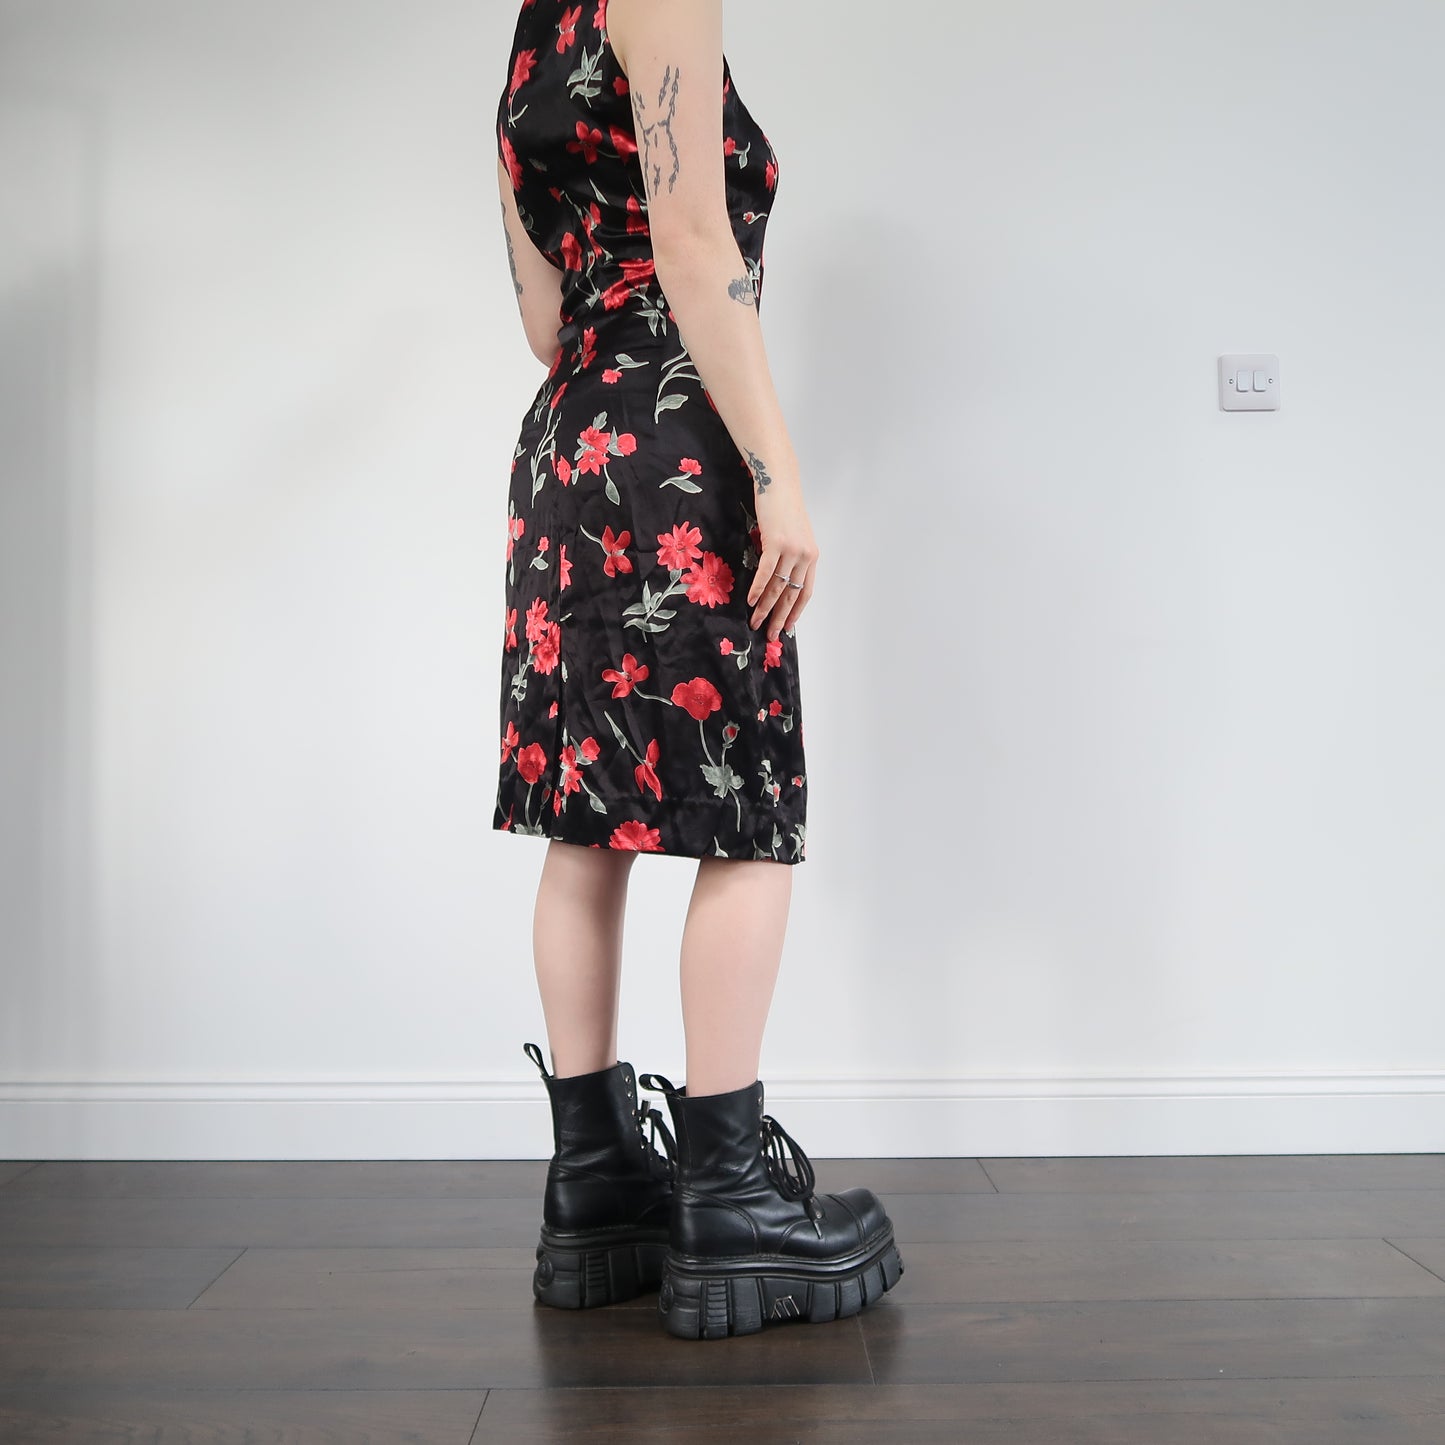 Red and black floral dress - size 10